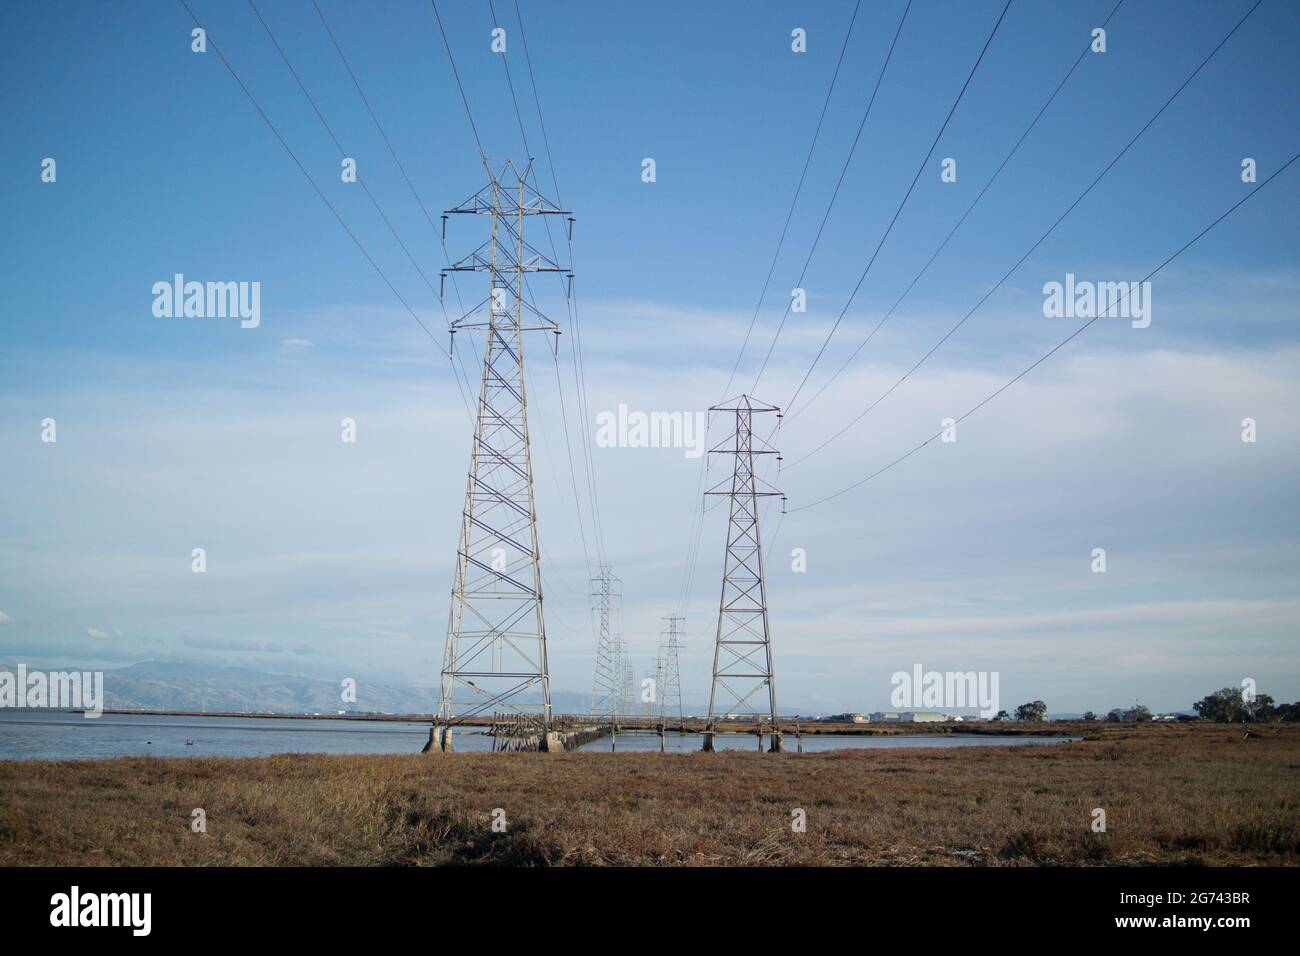 Transmission towers in two lines with overhead power cables going over marshland on San Francisco Bay Stock Photo